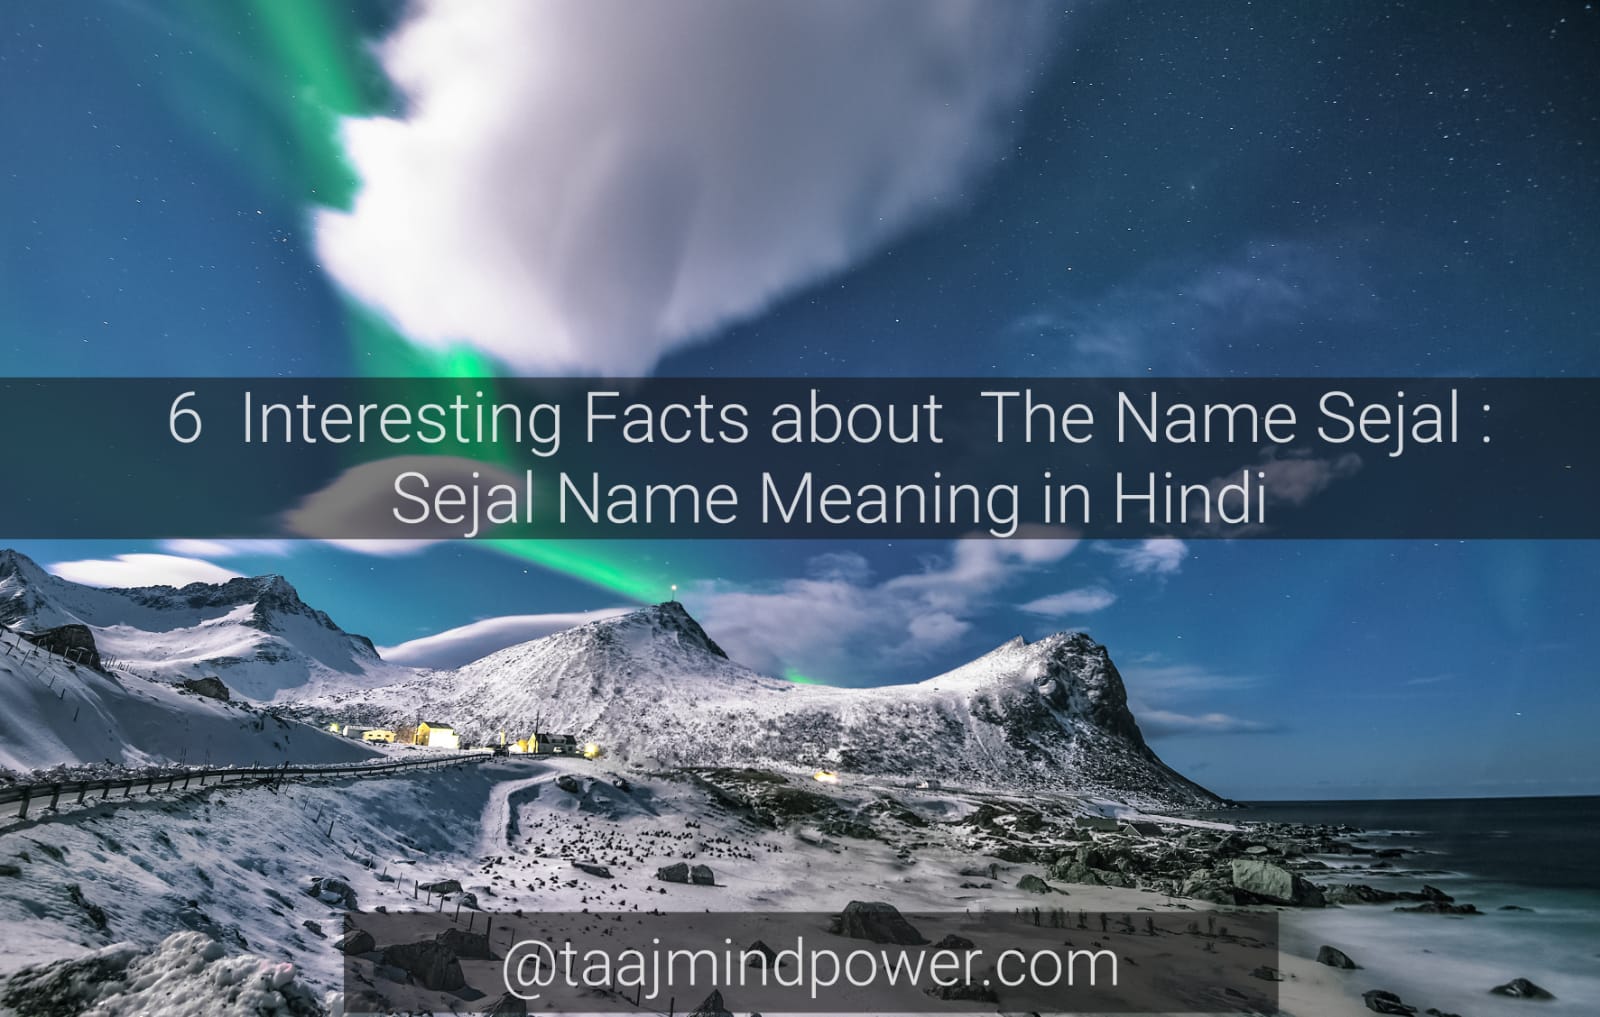 Sejal Name Meaning in Hindi